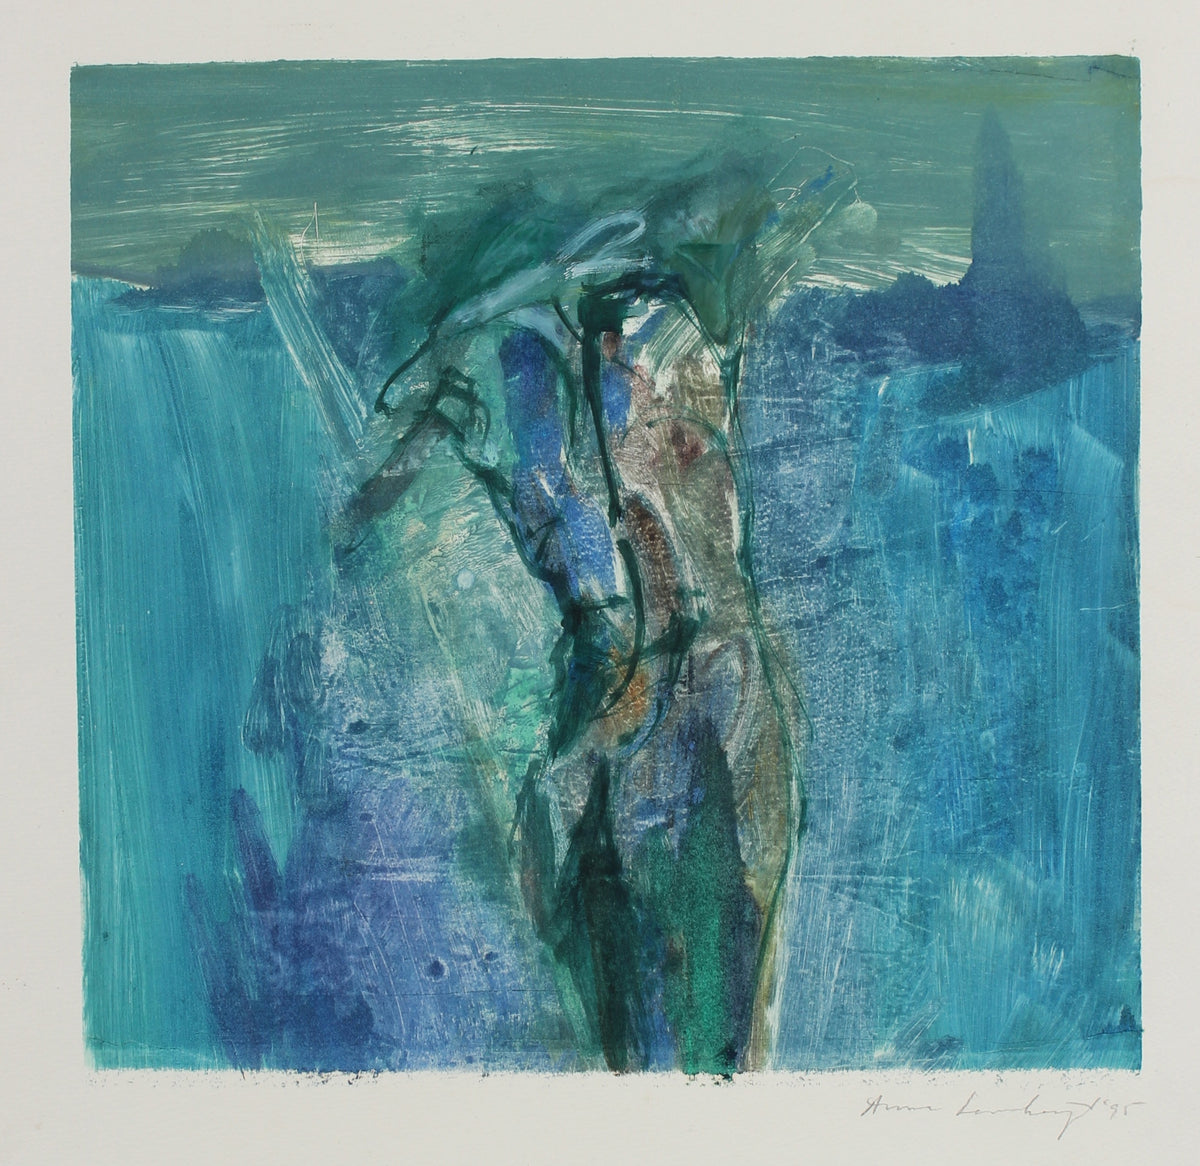 Abstracted Blue Figure Study&lt;br&gt;1995 Mixed Media Monotype&lt;br&gt;&lt;br&gt;#99162